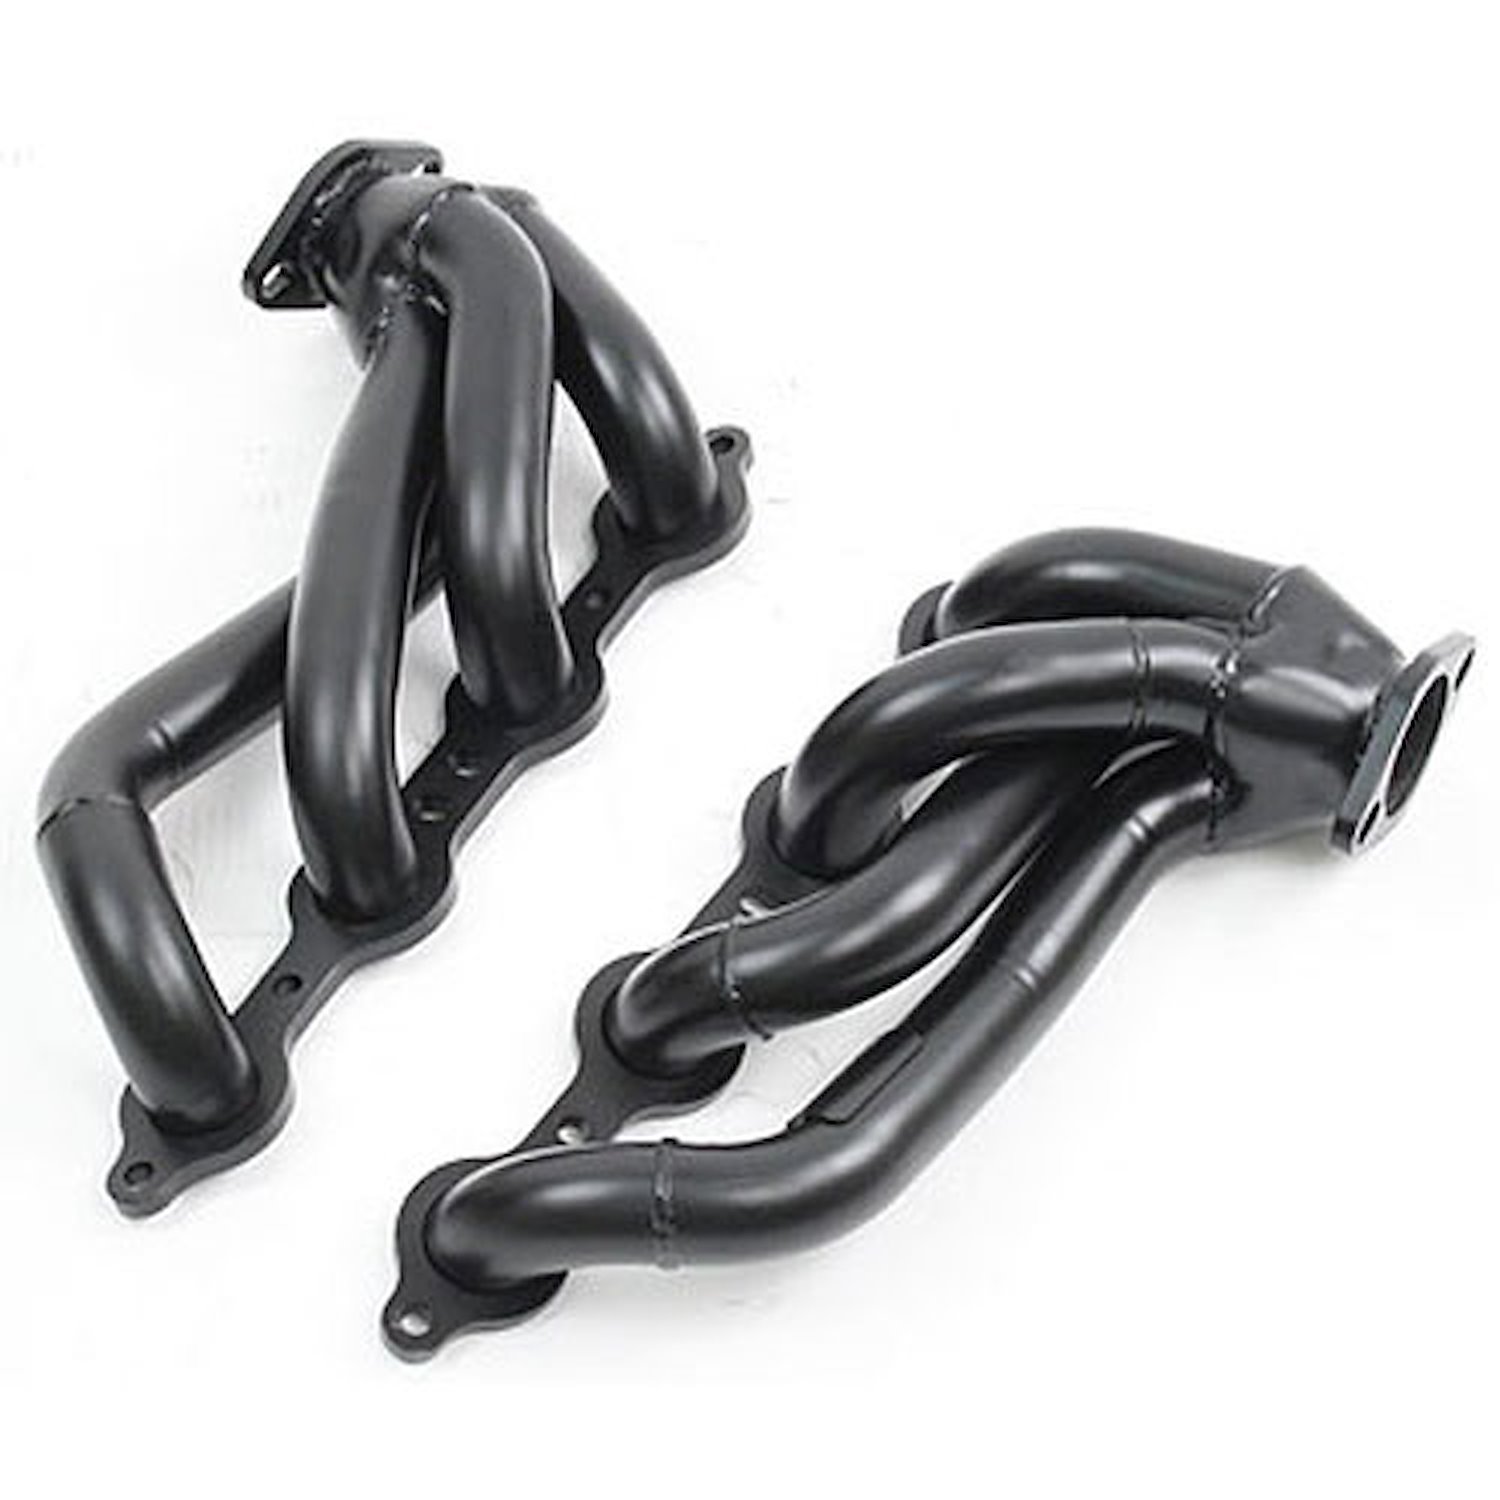 Painted Shorty Headers 2010-2014 Chevy Camaro 6.2L